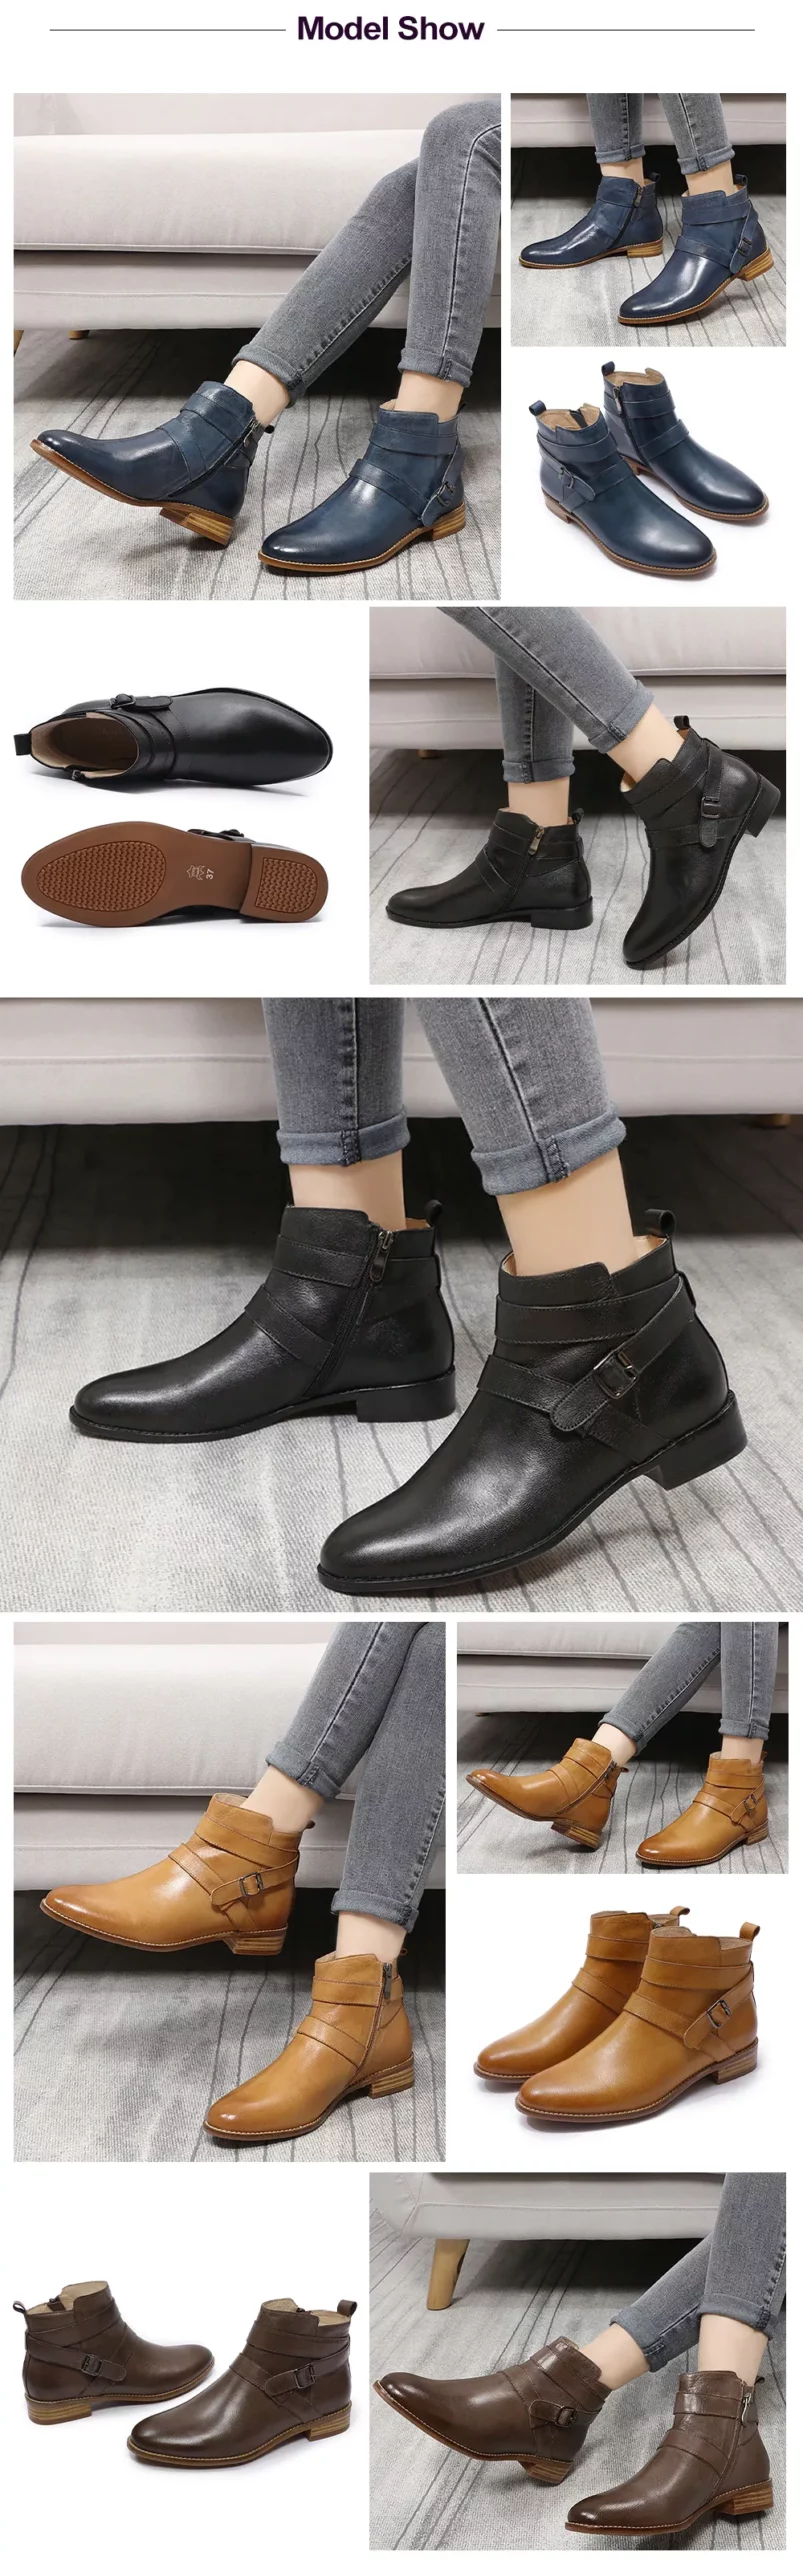 Mona Flying Women Genuine Leather Boots Hand-made Fashion Ankle Classic Soft Booties Slip-on Shoes with Low Heel 2021 NeW 068-6